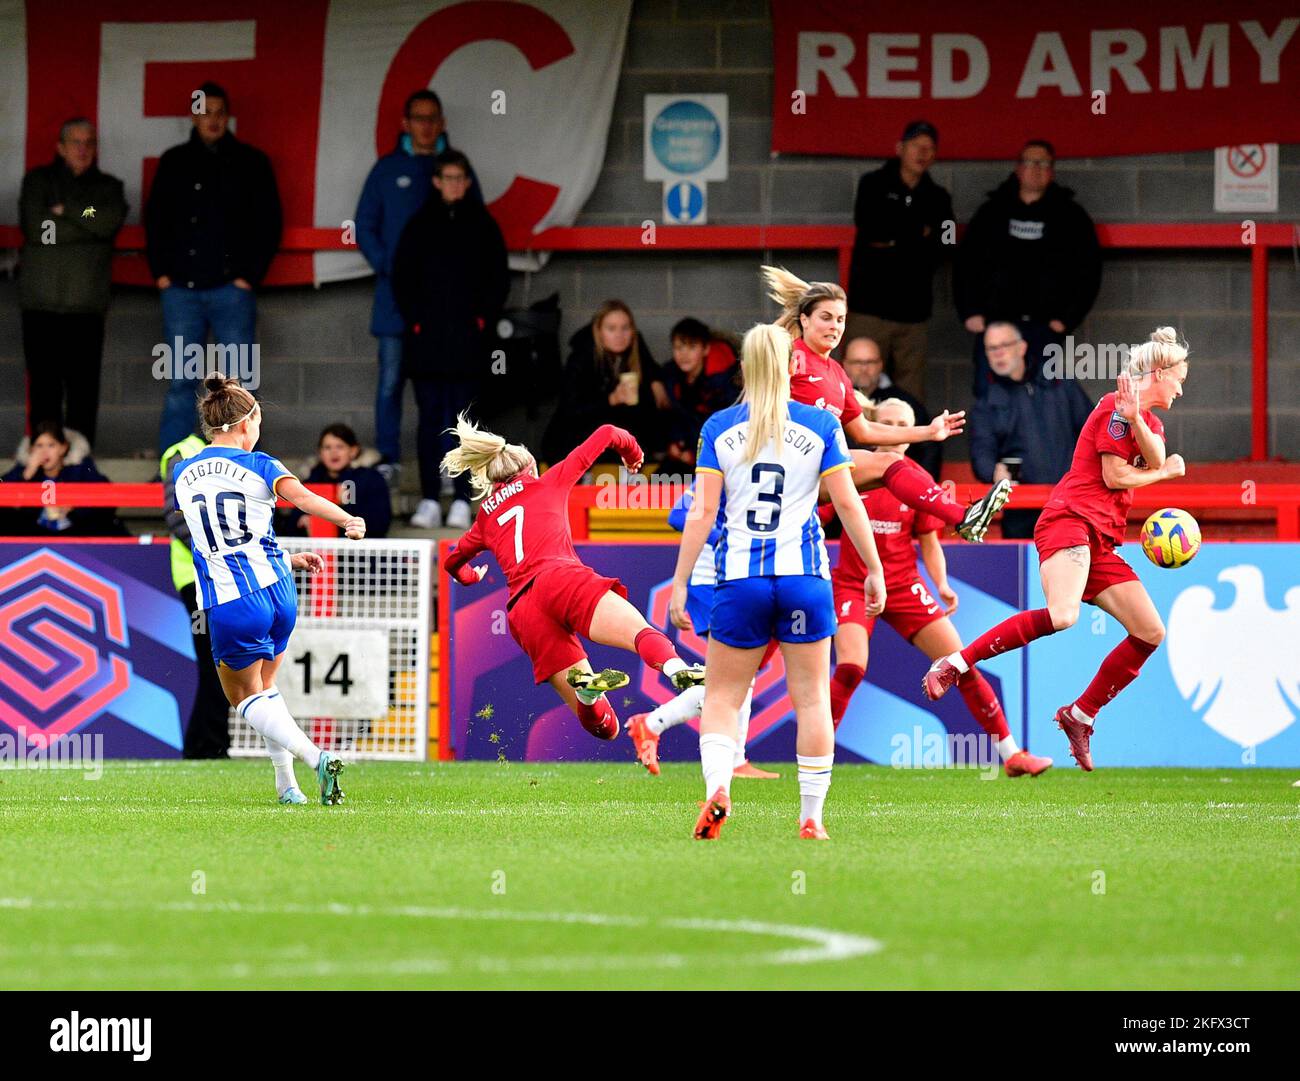 Crawley, UK. 20th Nov, 2022. Missy Bo Kearns of Liverpool tries to stop the shot on goal by Julia Zigiotti Olme of Brighton and Hove Albion during the FA Women's Super League match between Brighton & Hove Albion Women and Liverpool Women at The People's Pension Stadium on November 20th 2022 in Crawley, United Kingdom. (Photo by Jeff Mood/phcimages.com) Credit: PHC Images/Alamy Live News Stock Photo